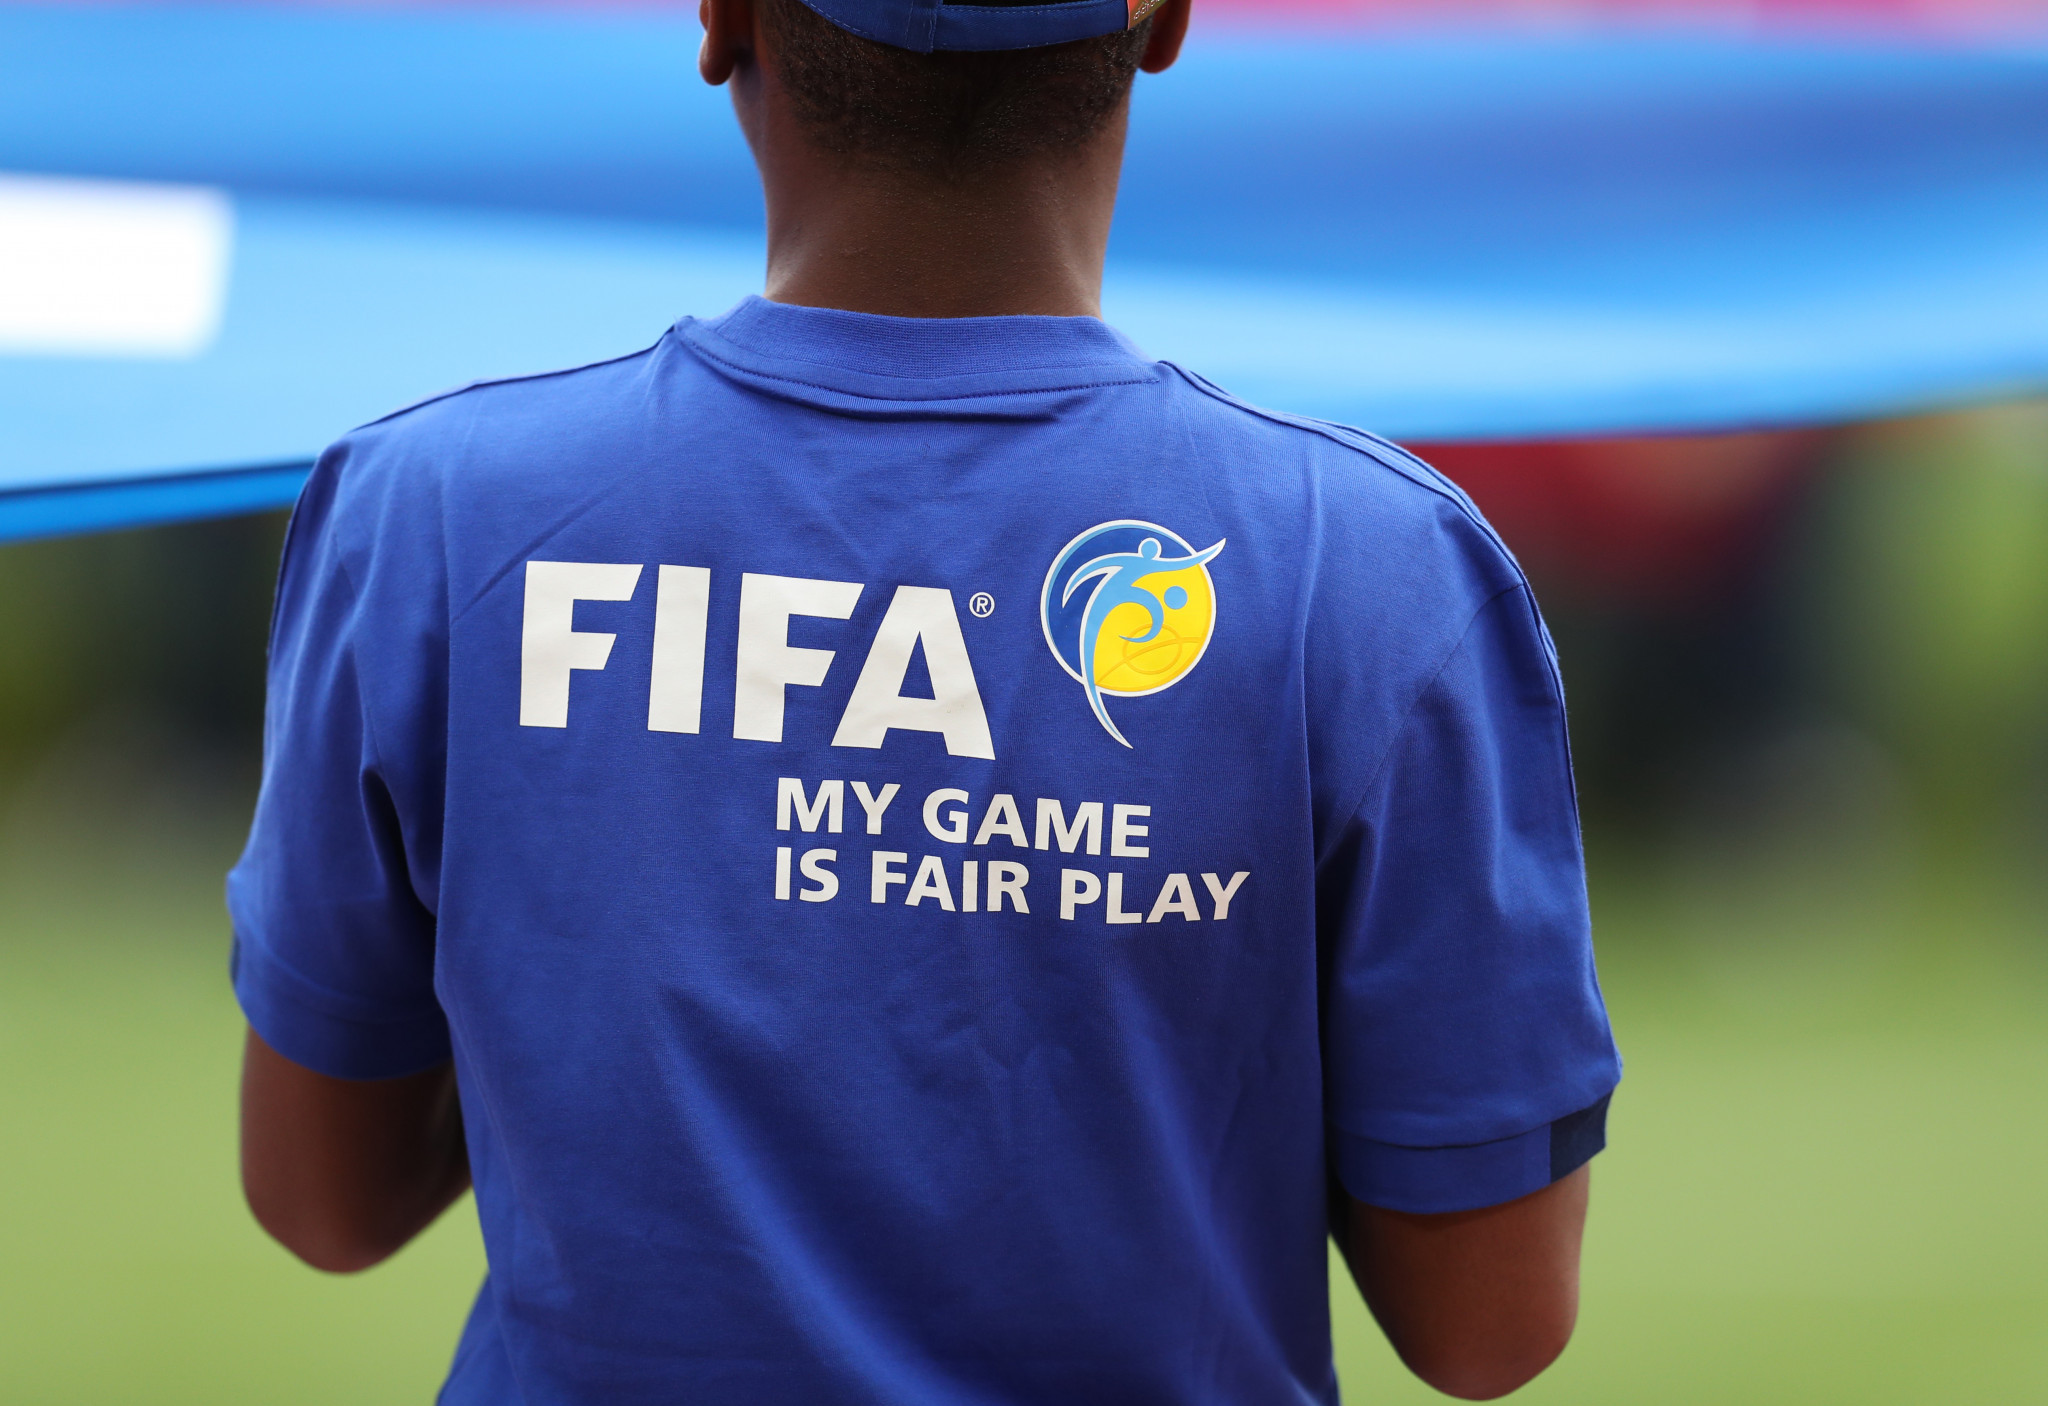 Tanzanian referee banned for life by FIFA after found guilty of bribery